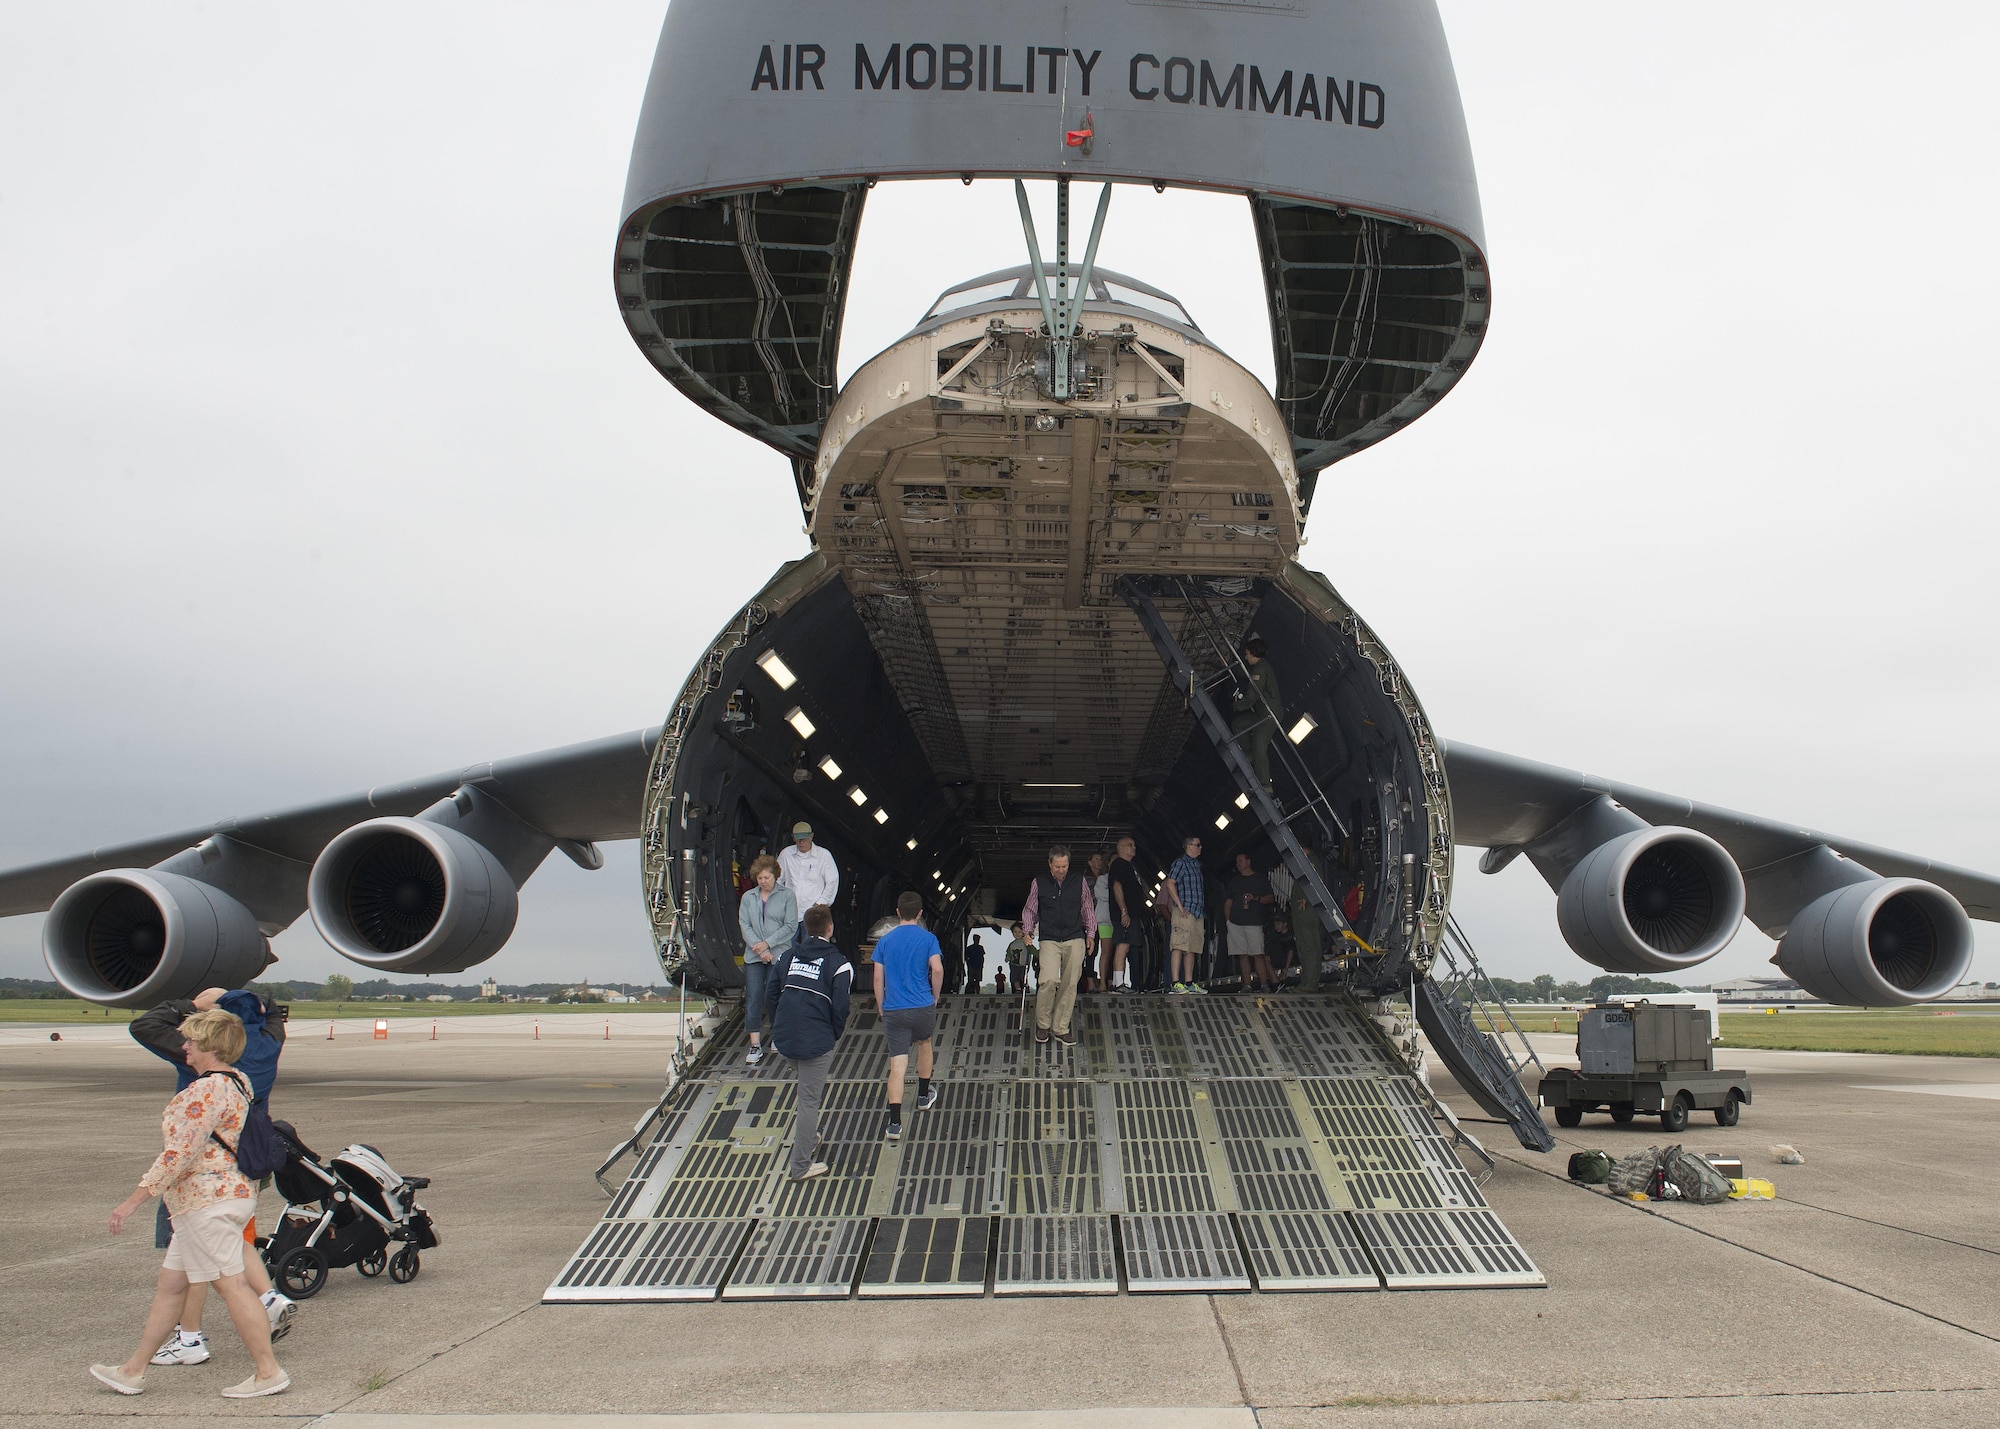 Museum visitors tour a Team Dover operational C-5M Super Galaxy during the Air Mobility Command Museum’s Festival of Flight 30th Anniversary celebration Sept. 24, 2016, at the AMC Museum on Dover Air Force Base, Del. Dover AFB provided this C-5M and an active duty C-17A Globemaster III for static display, open for public tours. (U.S. Air Force photo by Senior Airman Zachary Cacicia)